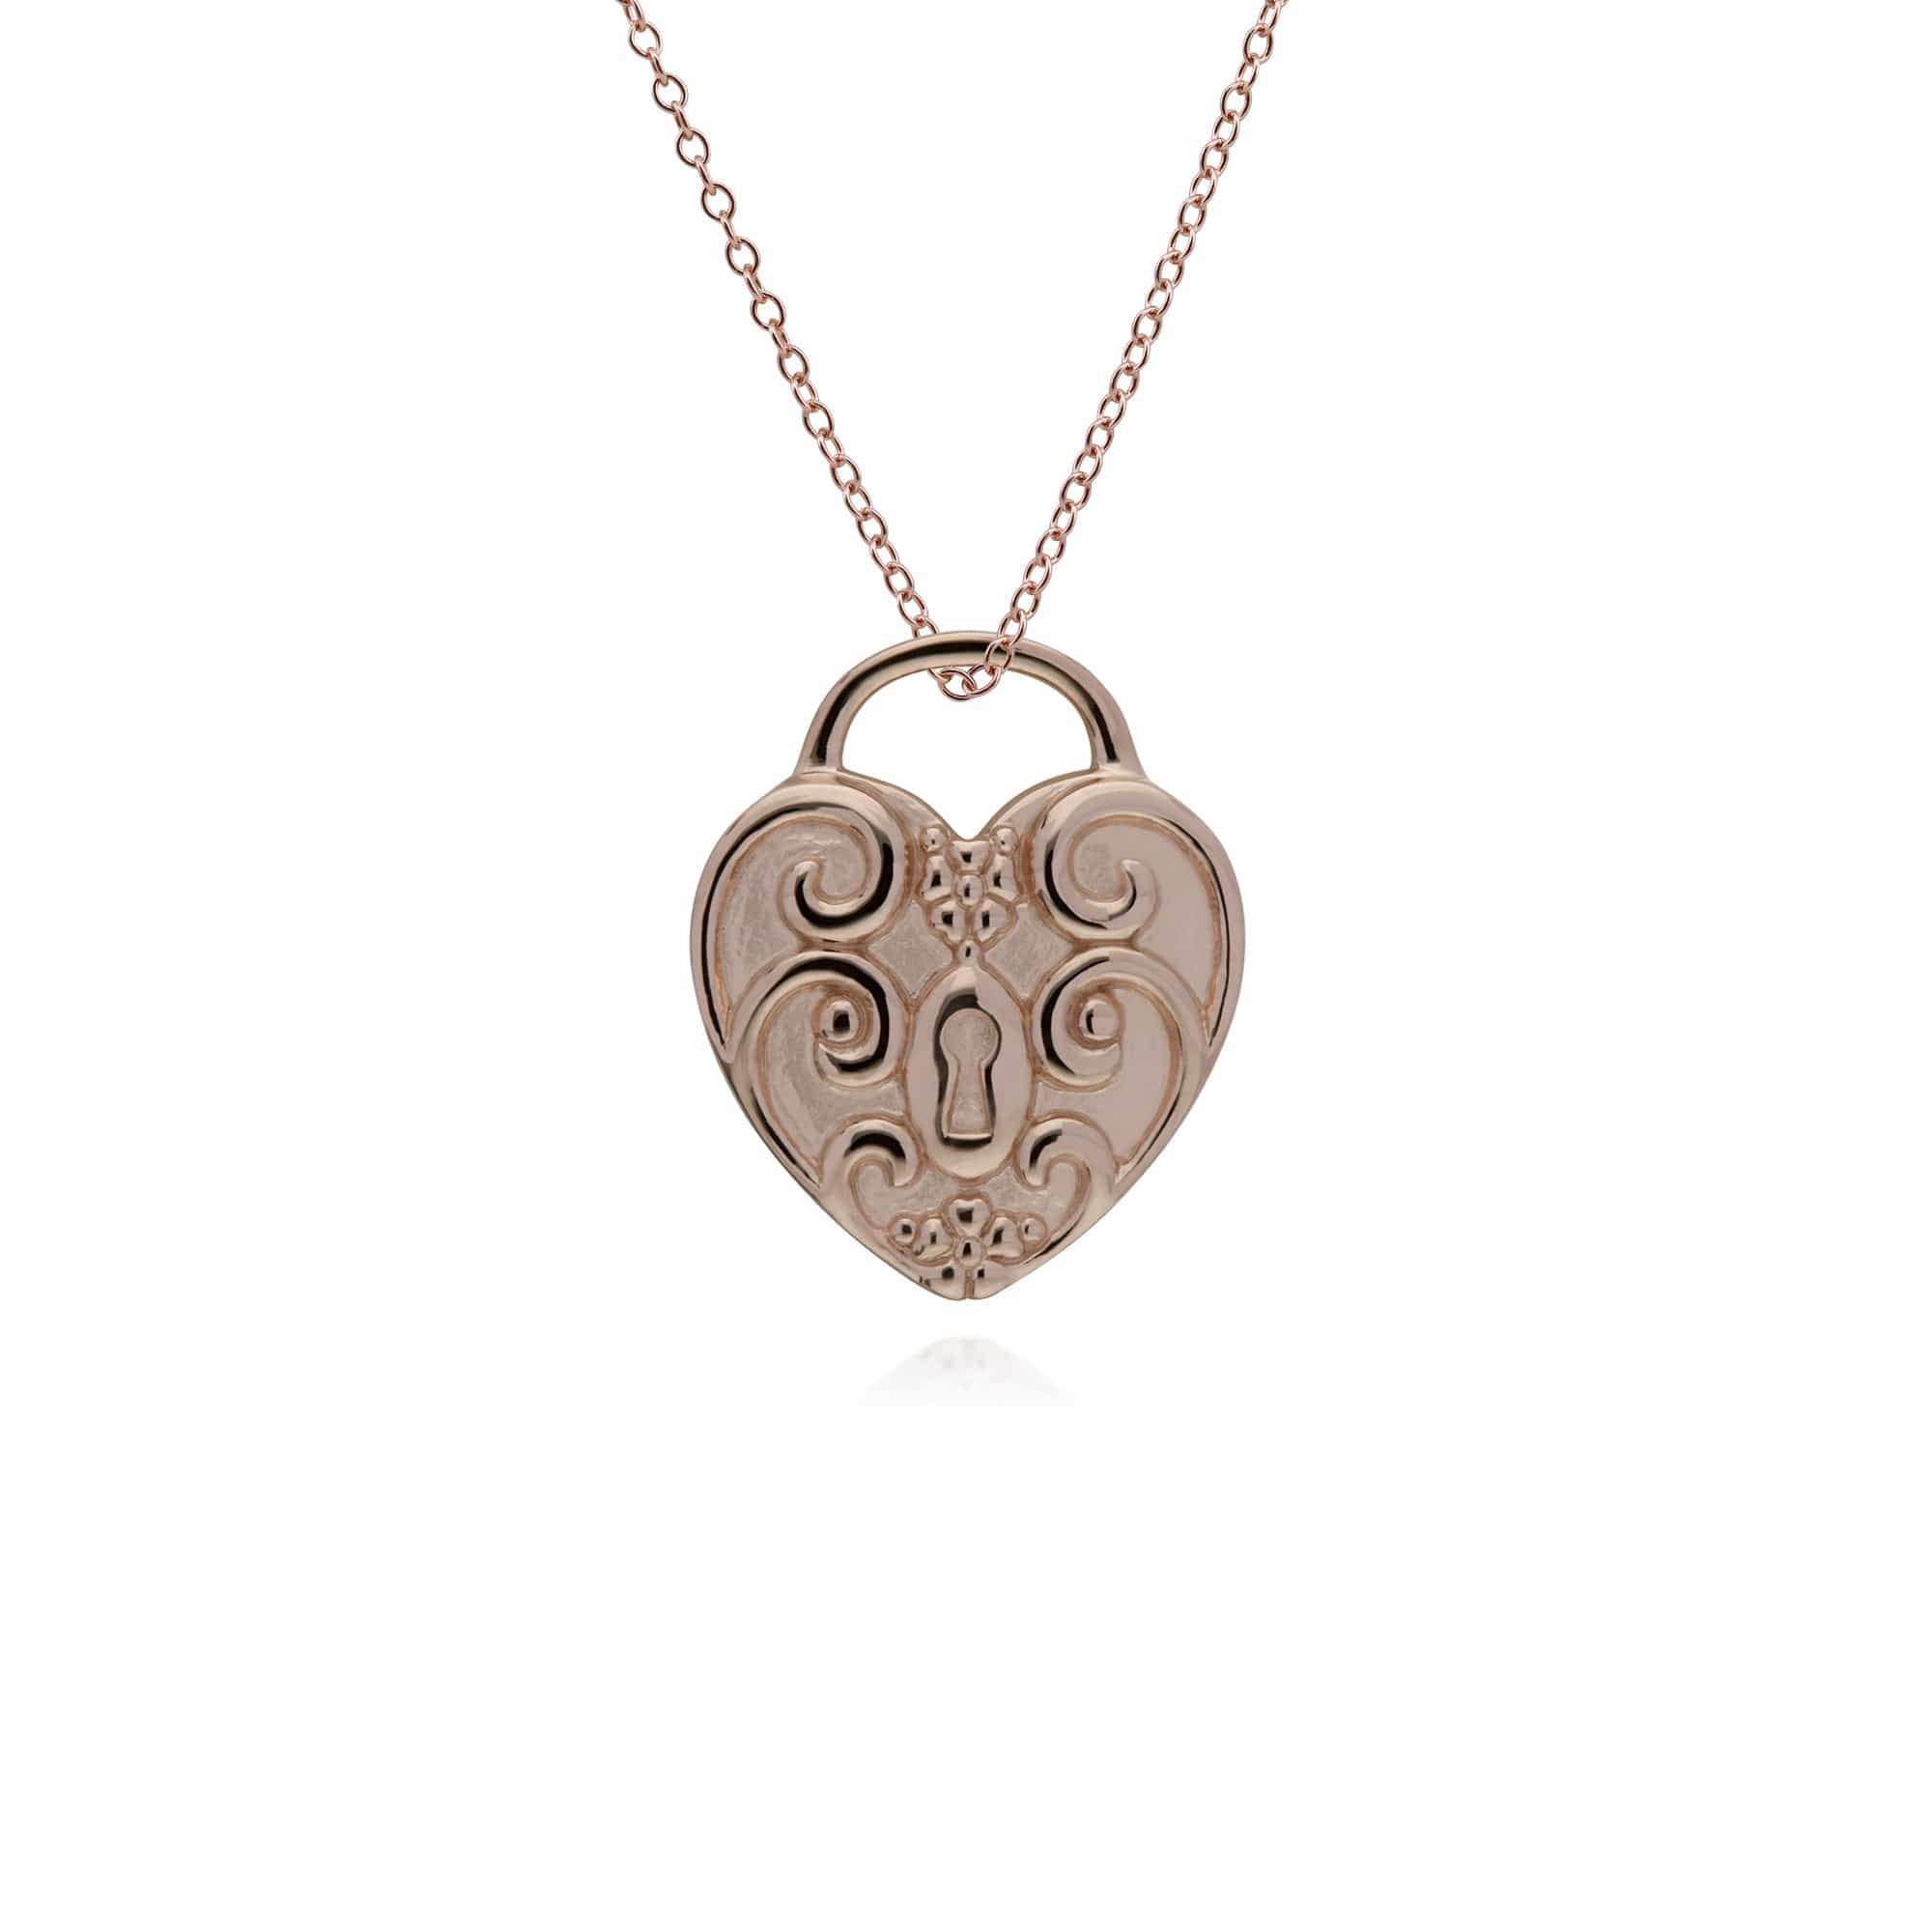 270P028603925-270P026501925 Classic Swirl Heart Lock Pendant & Jade Key Charm in Rose Gold Plated 925 Sterling Silver 3